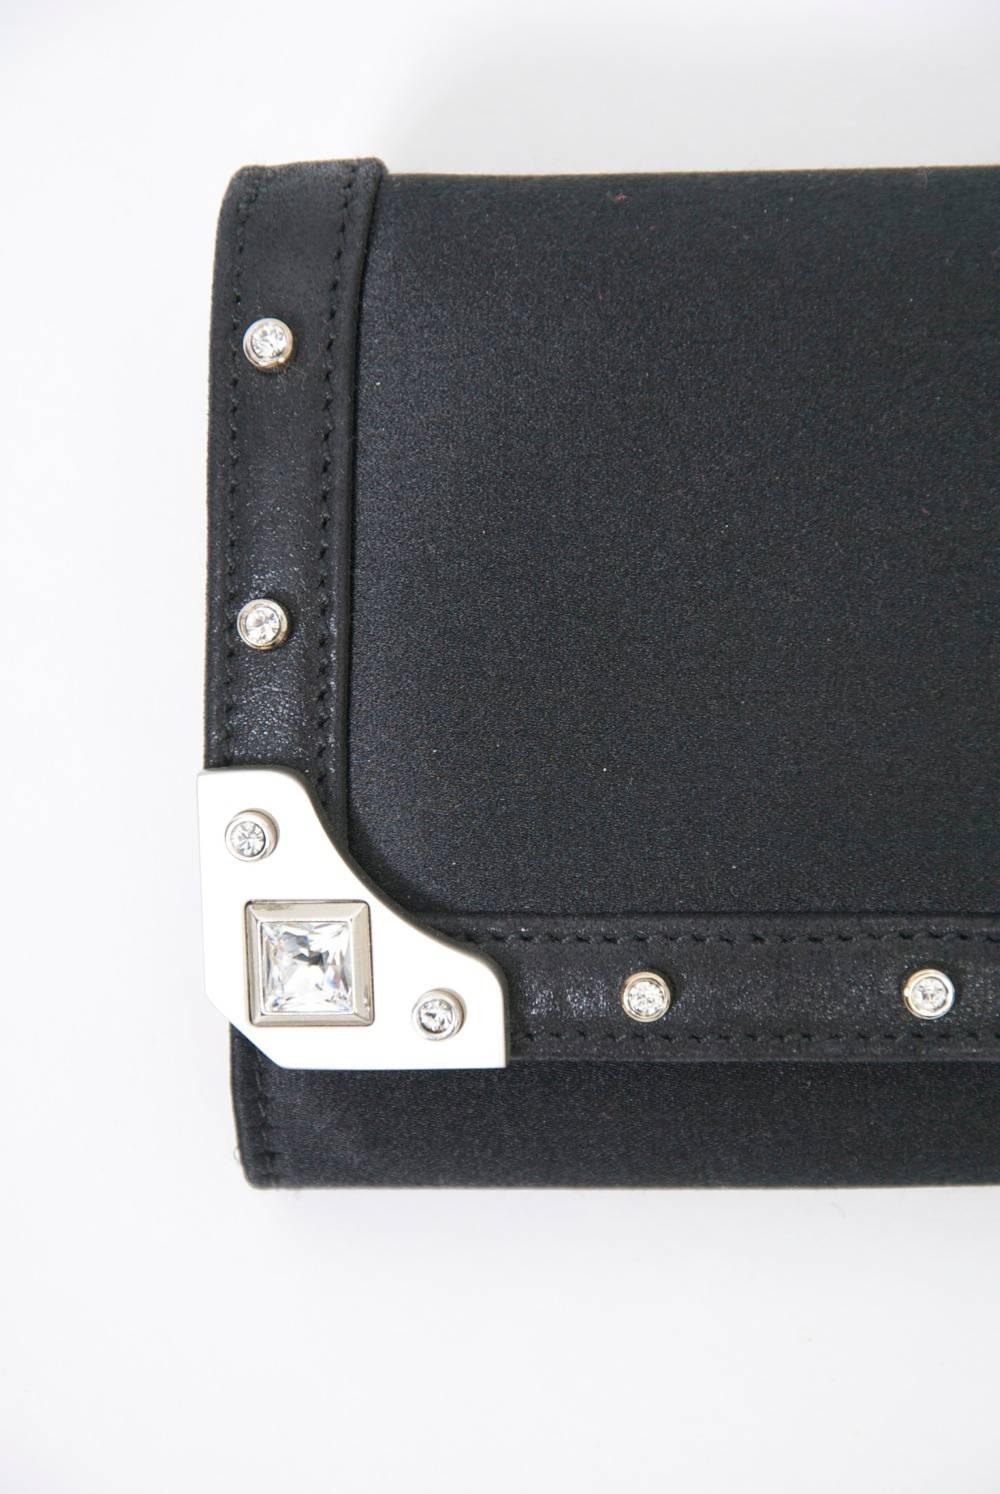 Sleek rectangular black fabric clutch by Judith Leiber, the border ornamented with brushed silver metal and crystals. Magnetic clasp. Interior features attached mirror and side compartment with change purse. Dust cover.